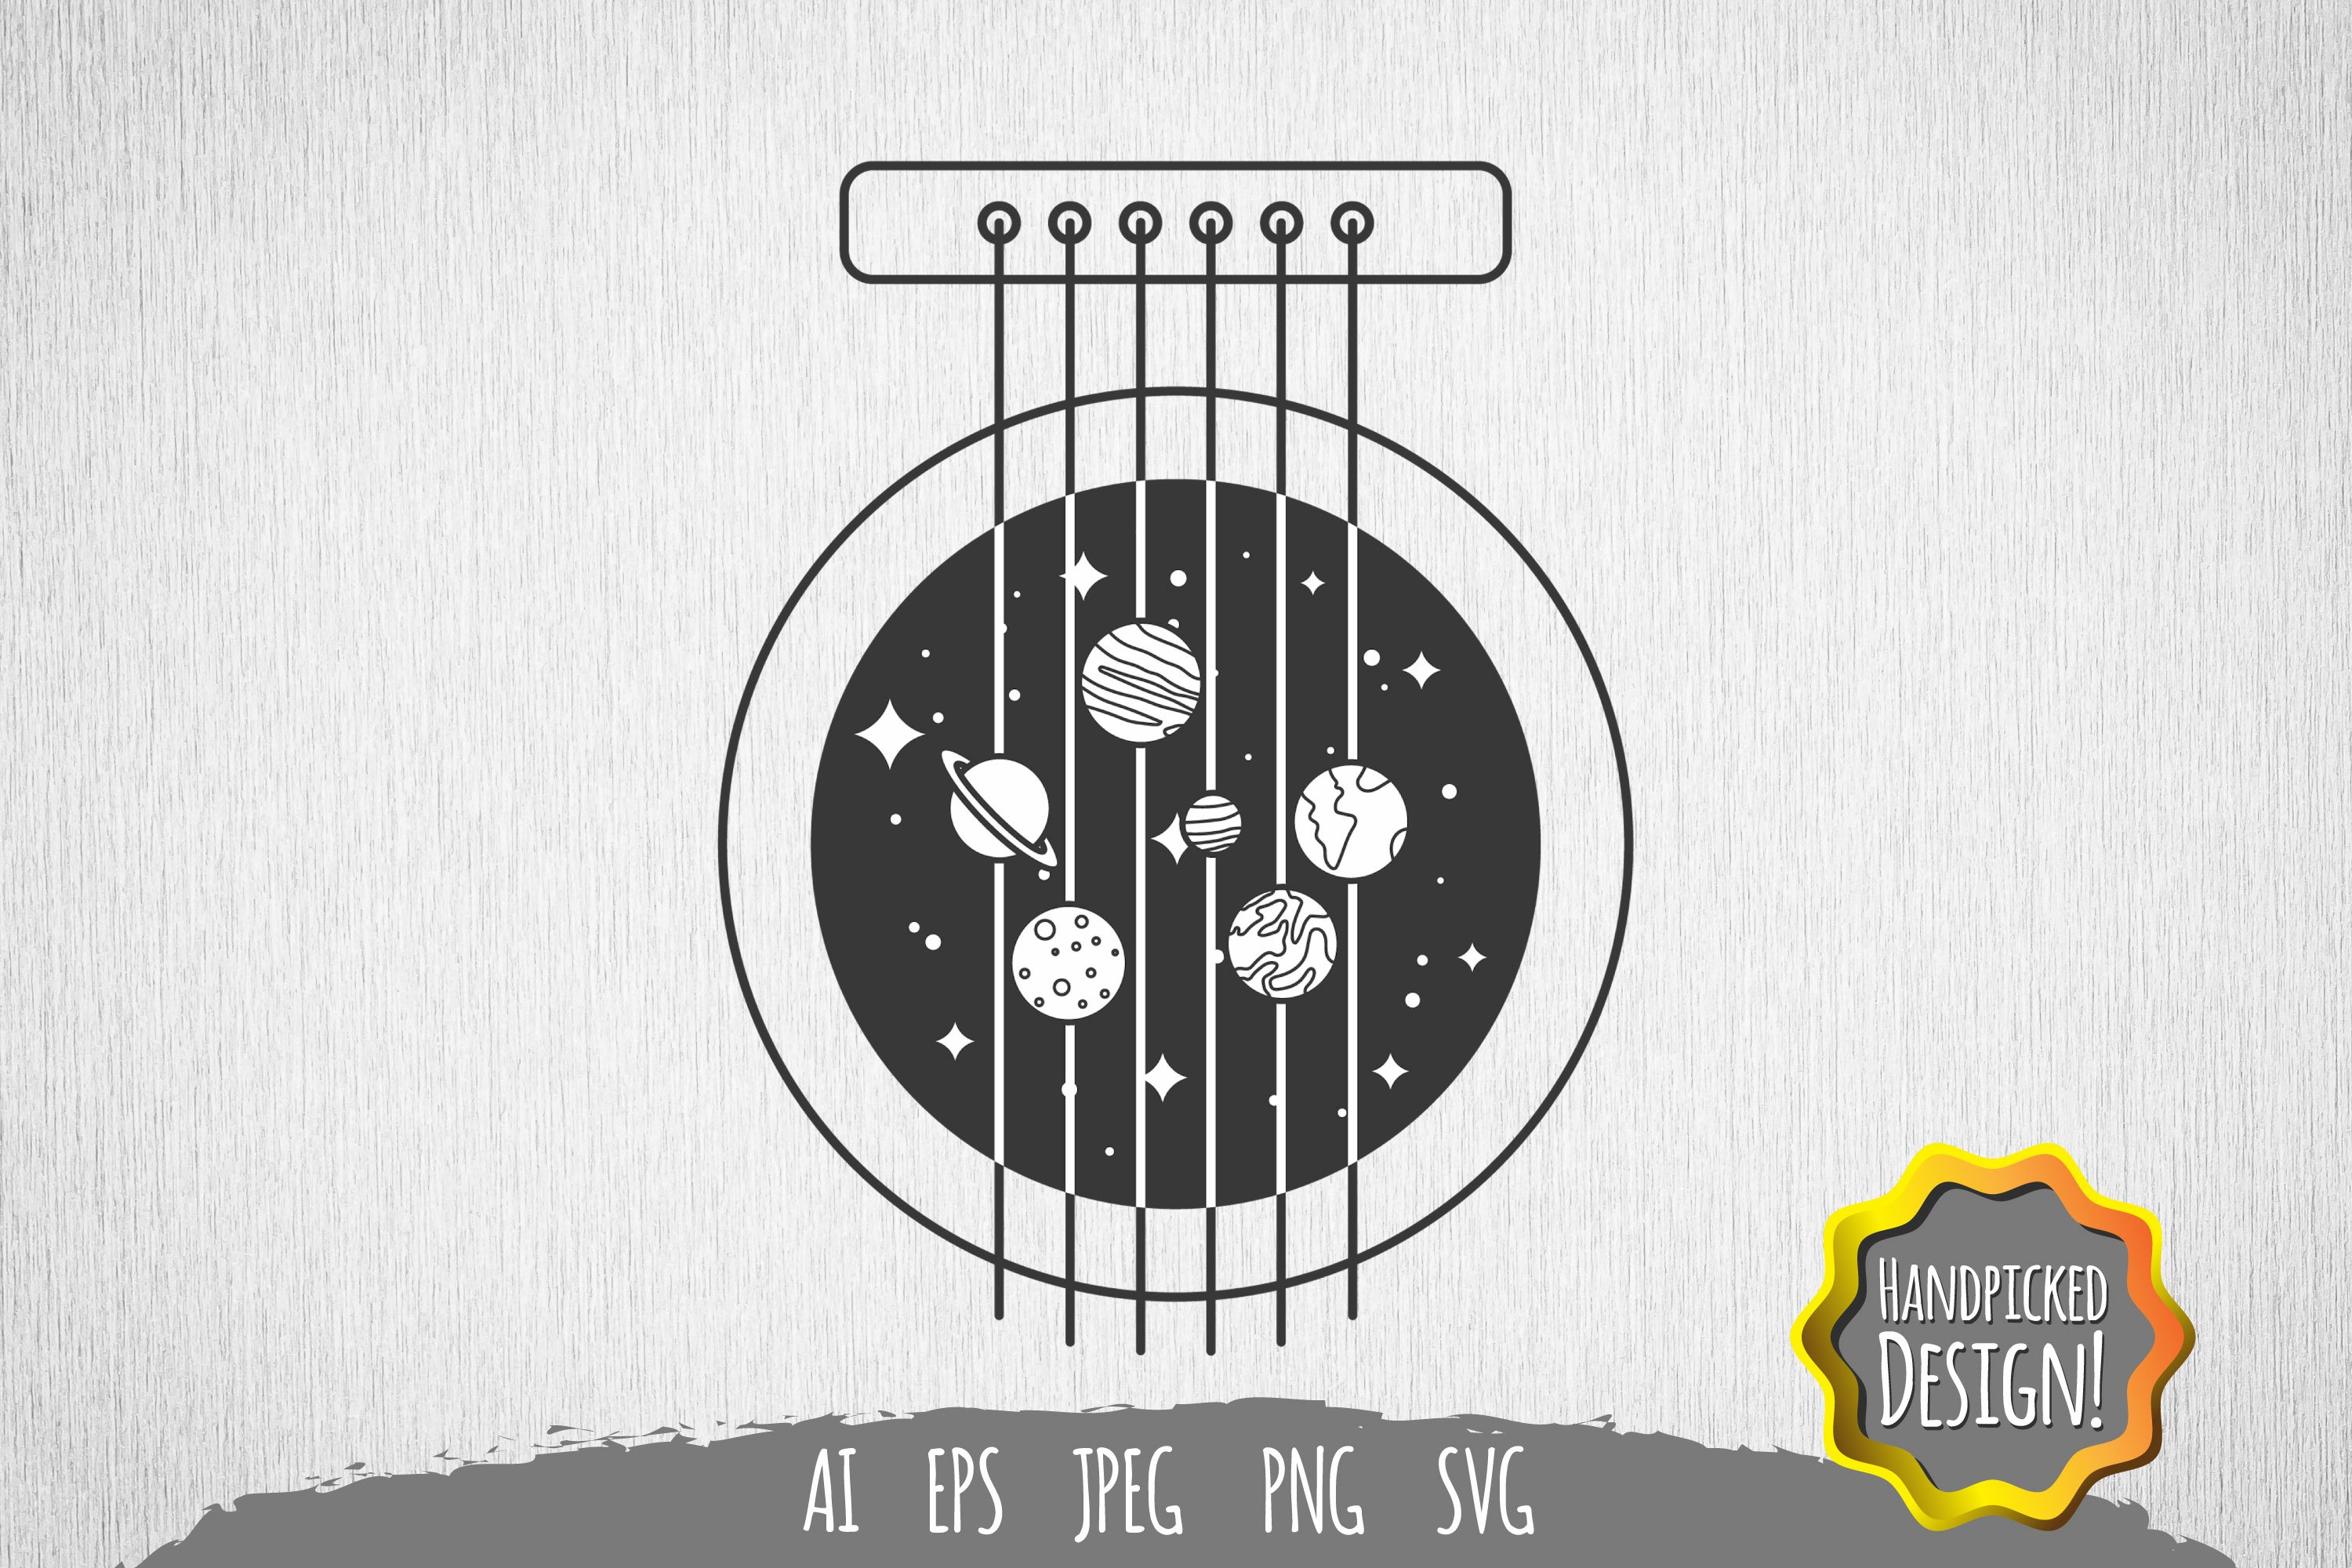 Guitar strings with planets in the middle.